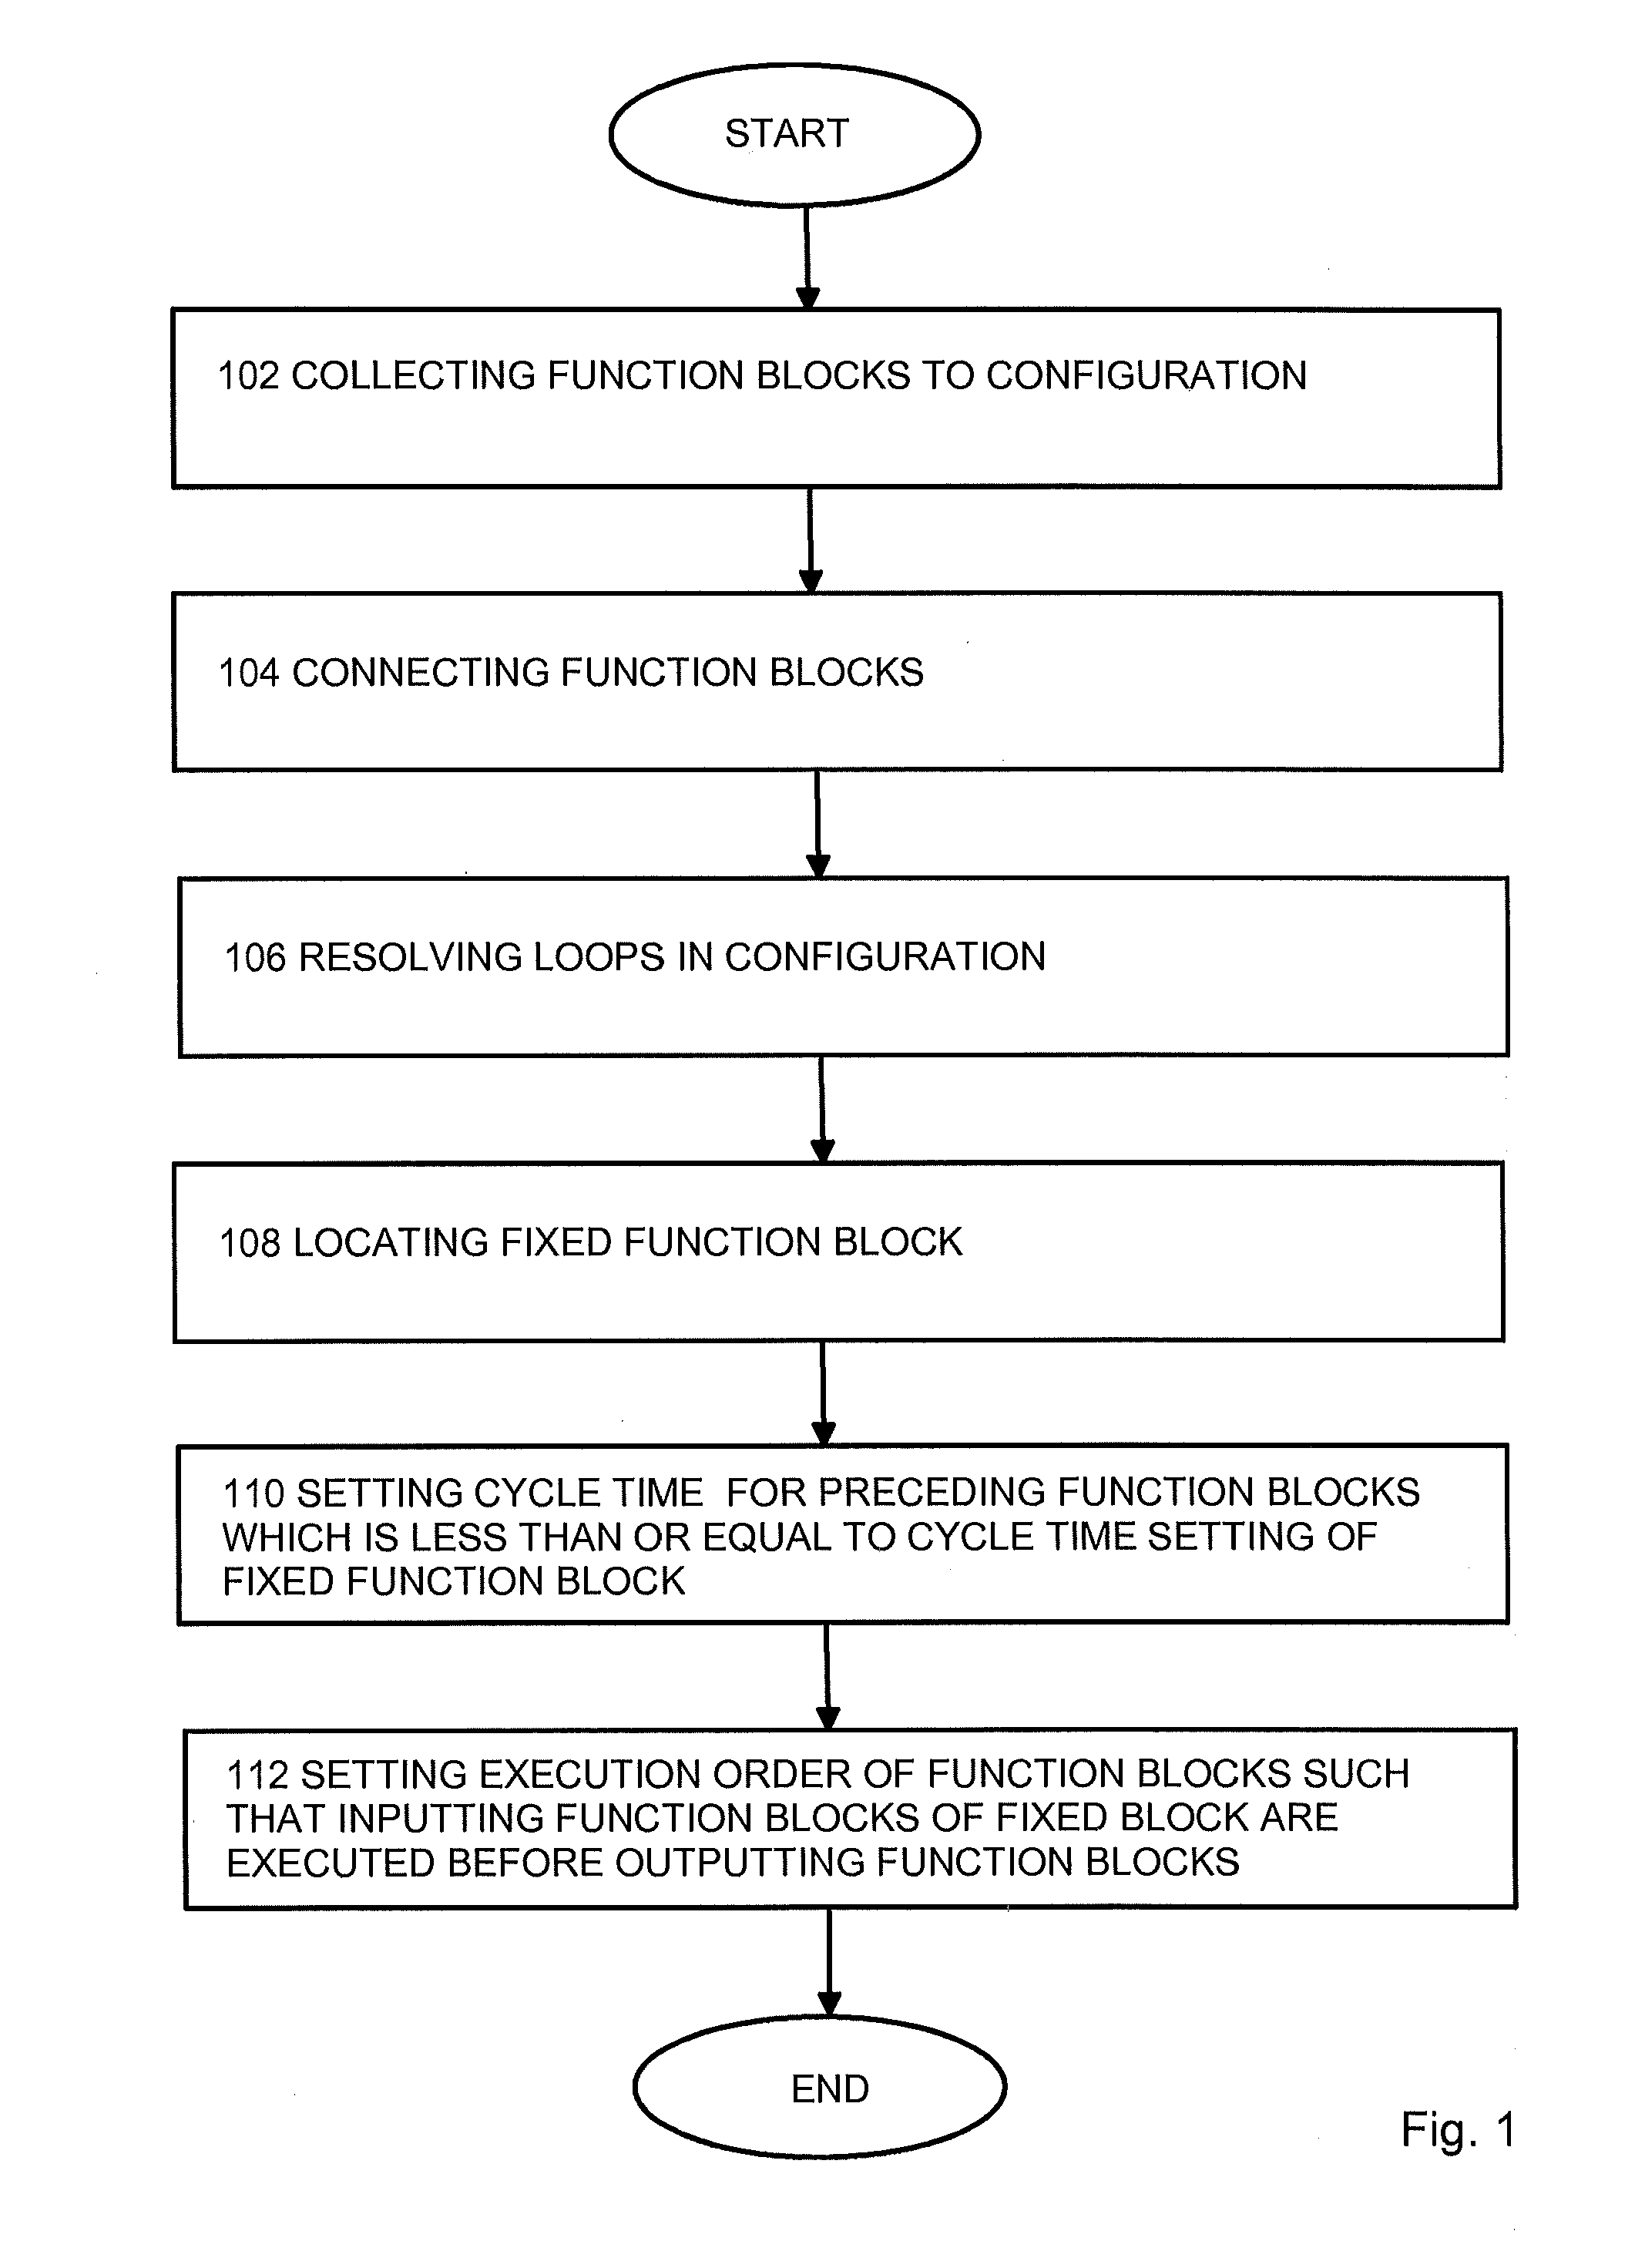 Configuring of intelligent electronic device